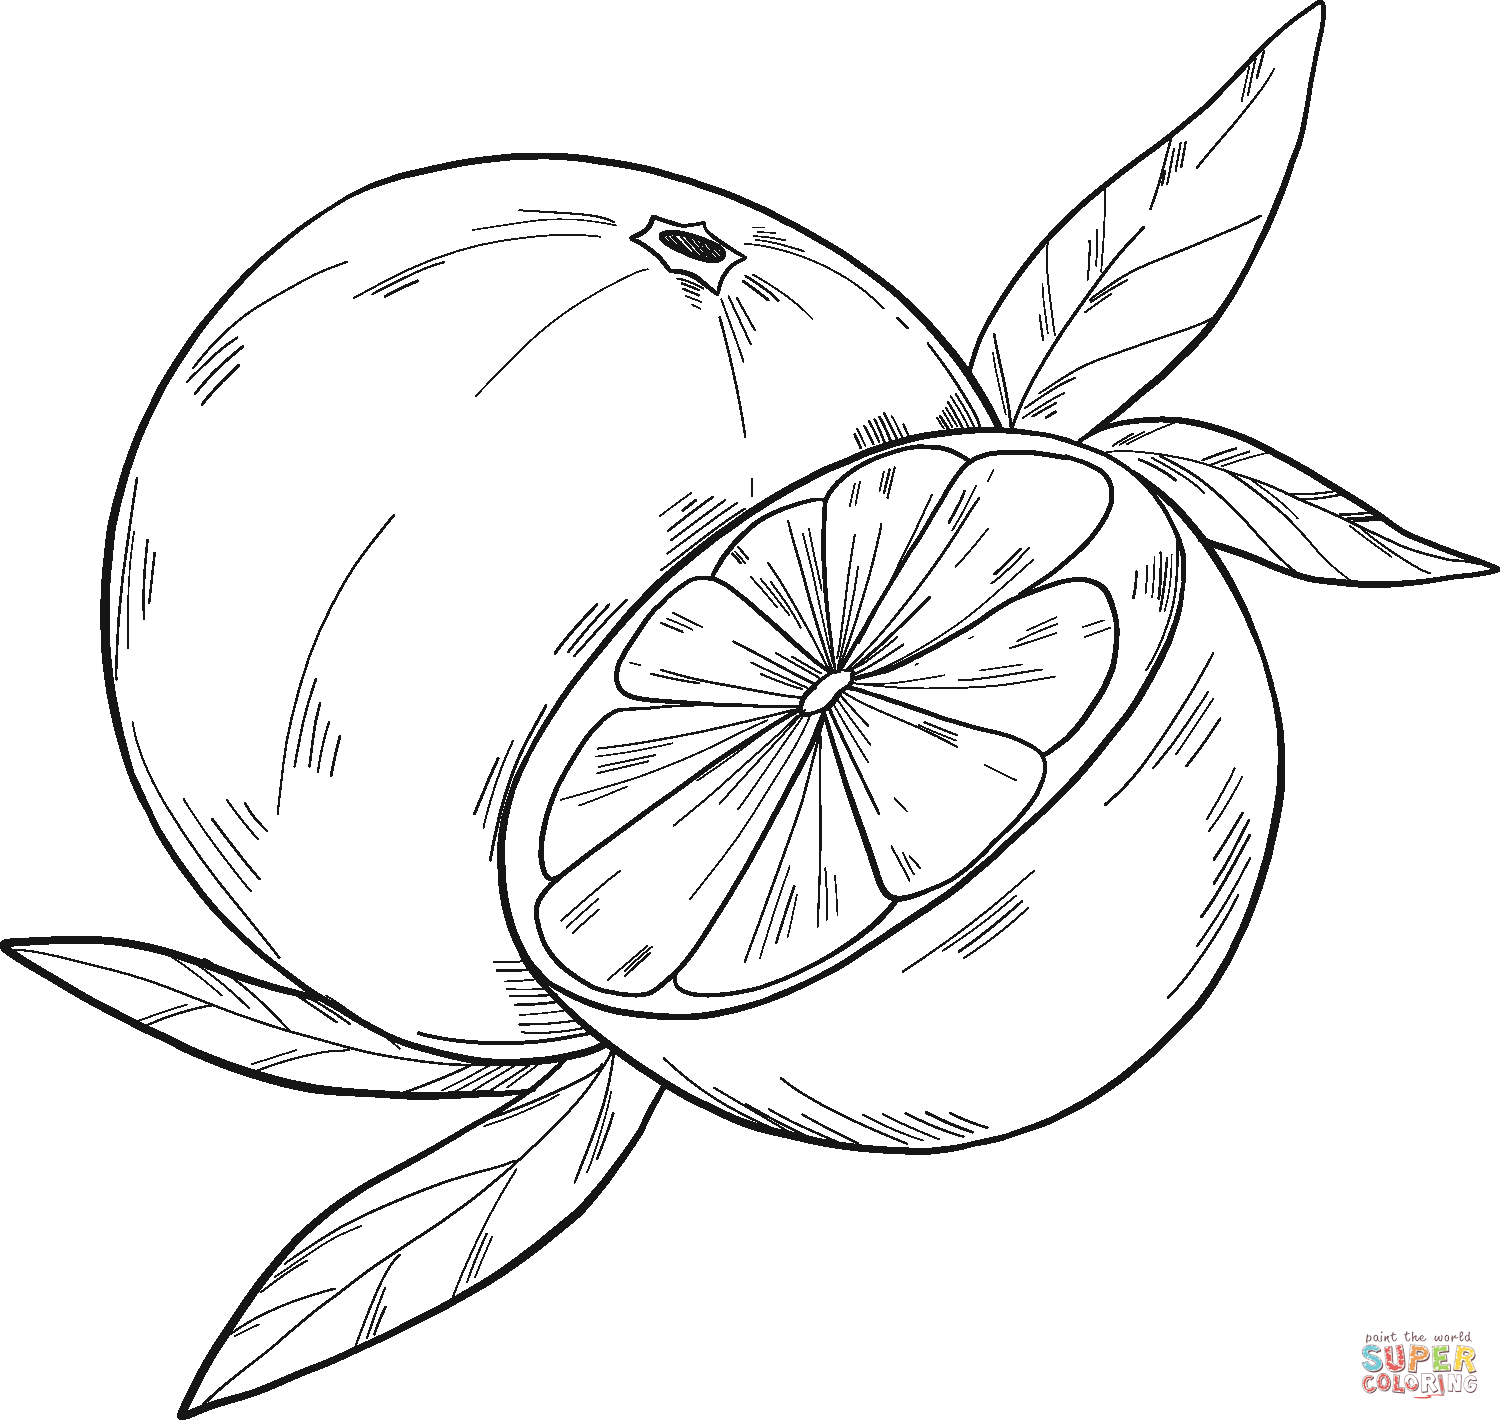 Oranges coloring page | Free Printable Coloring Pages